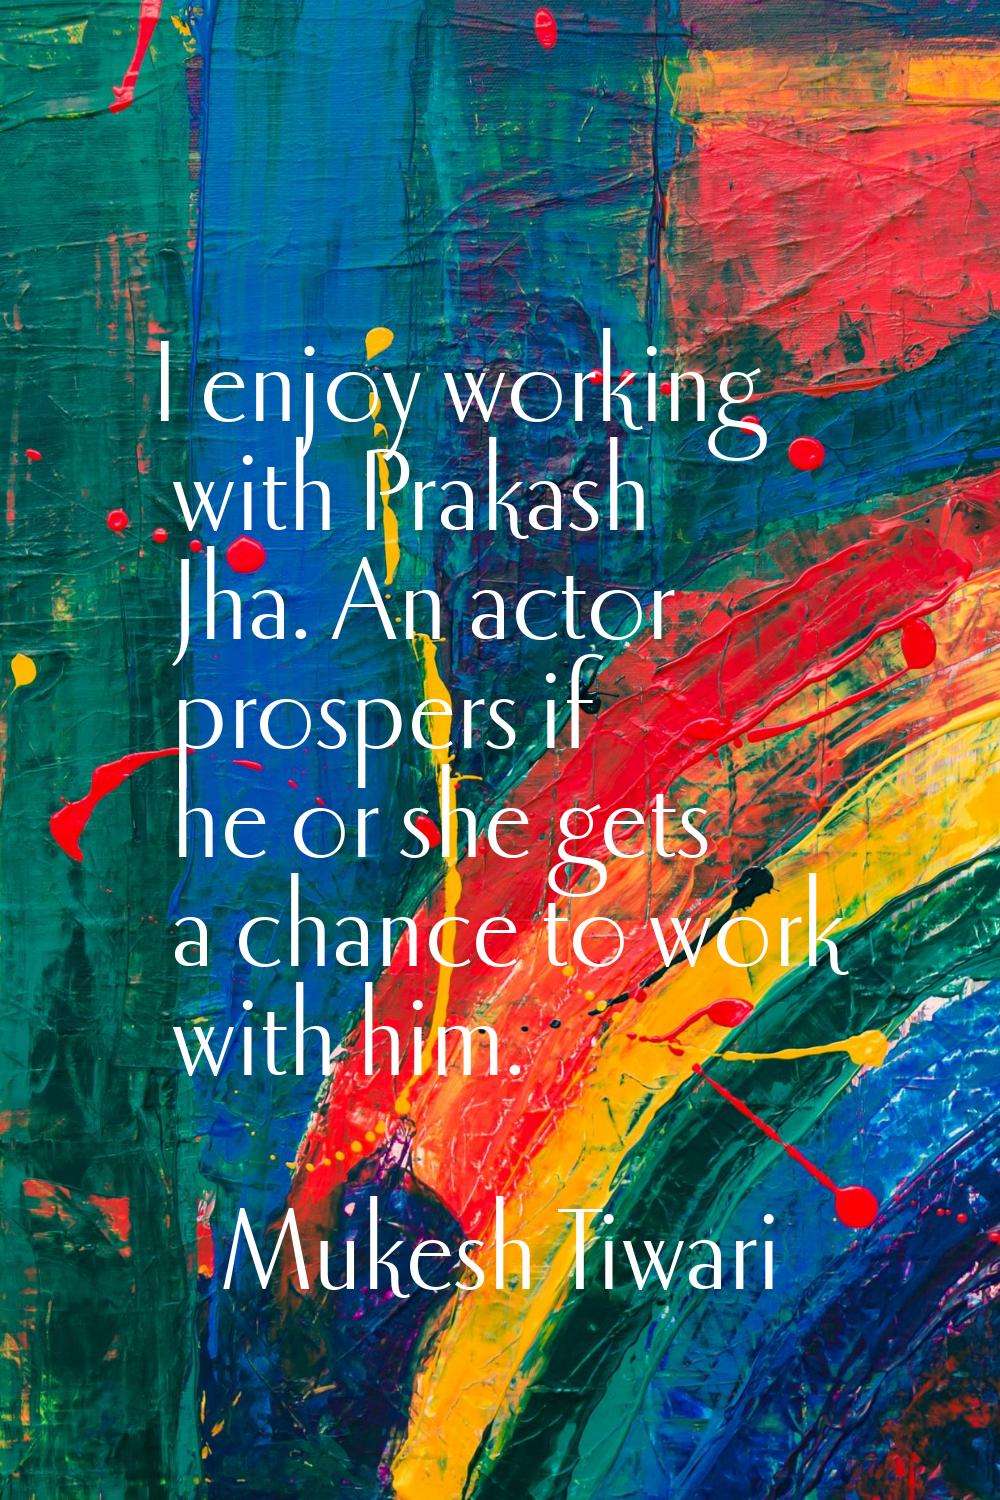 I enjoy working with Prakash Jha. An actor prospers if he or she gets a chance to work with him.